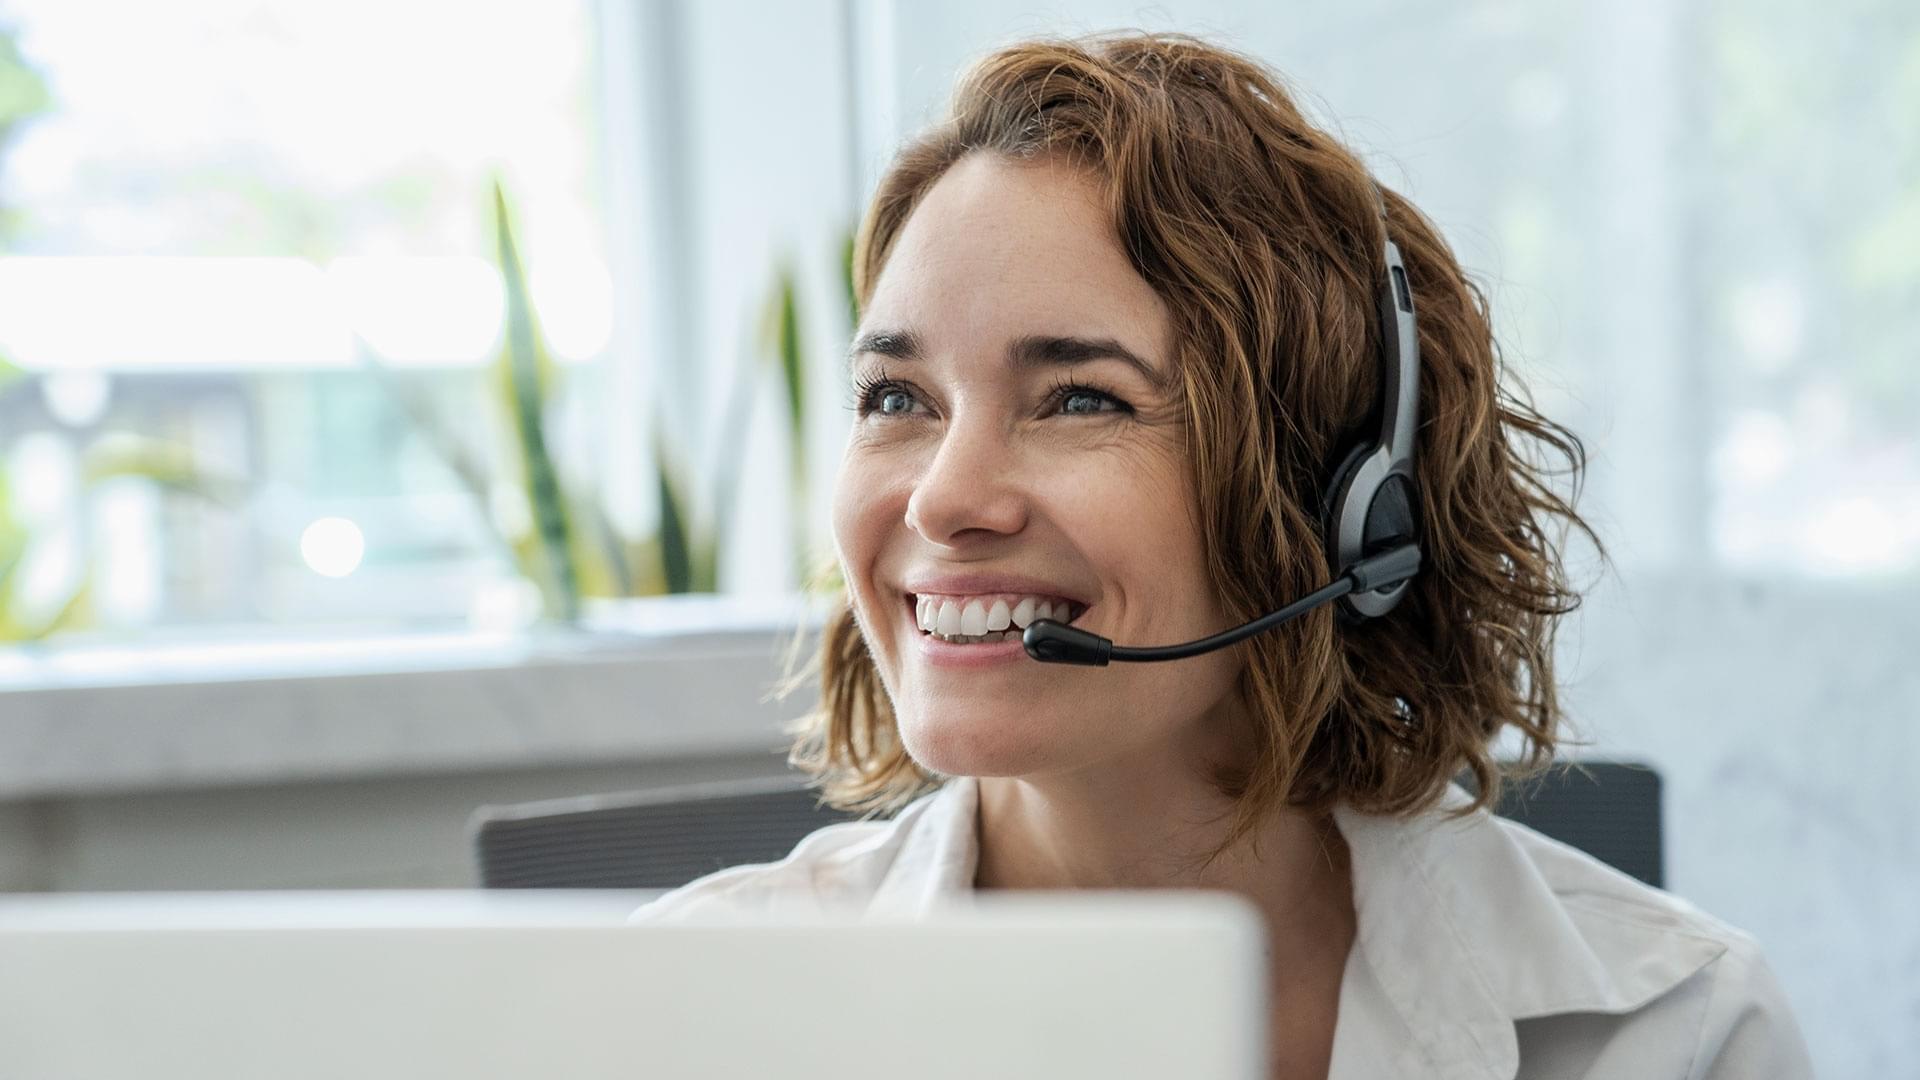 Call center employee during a business call